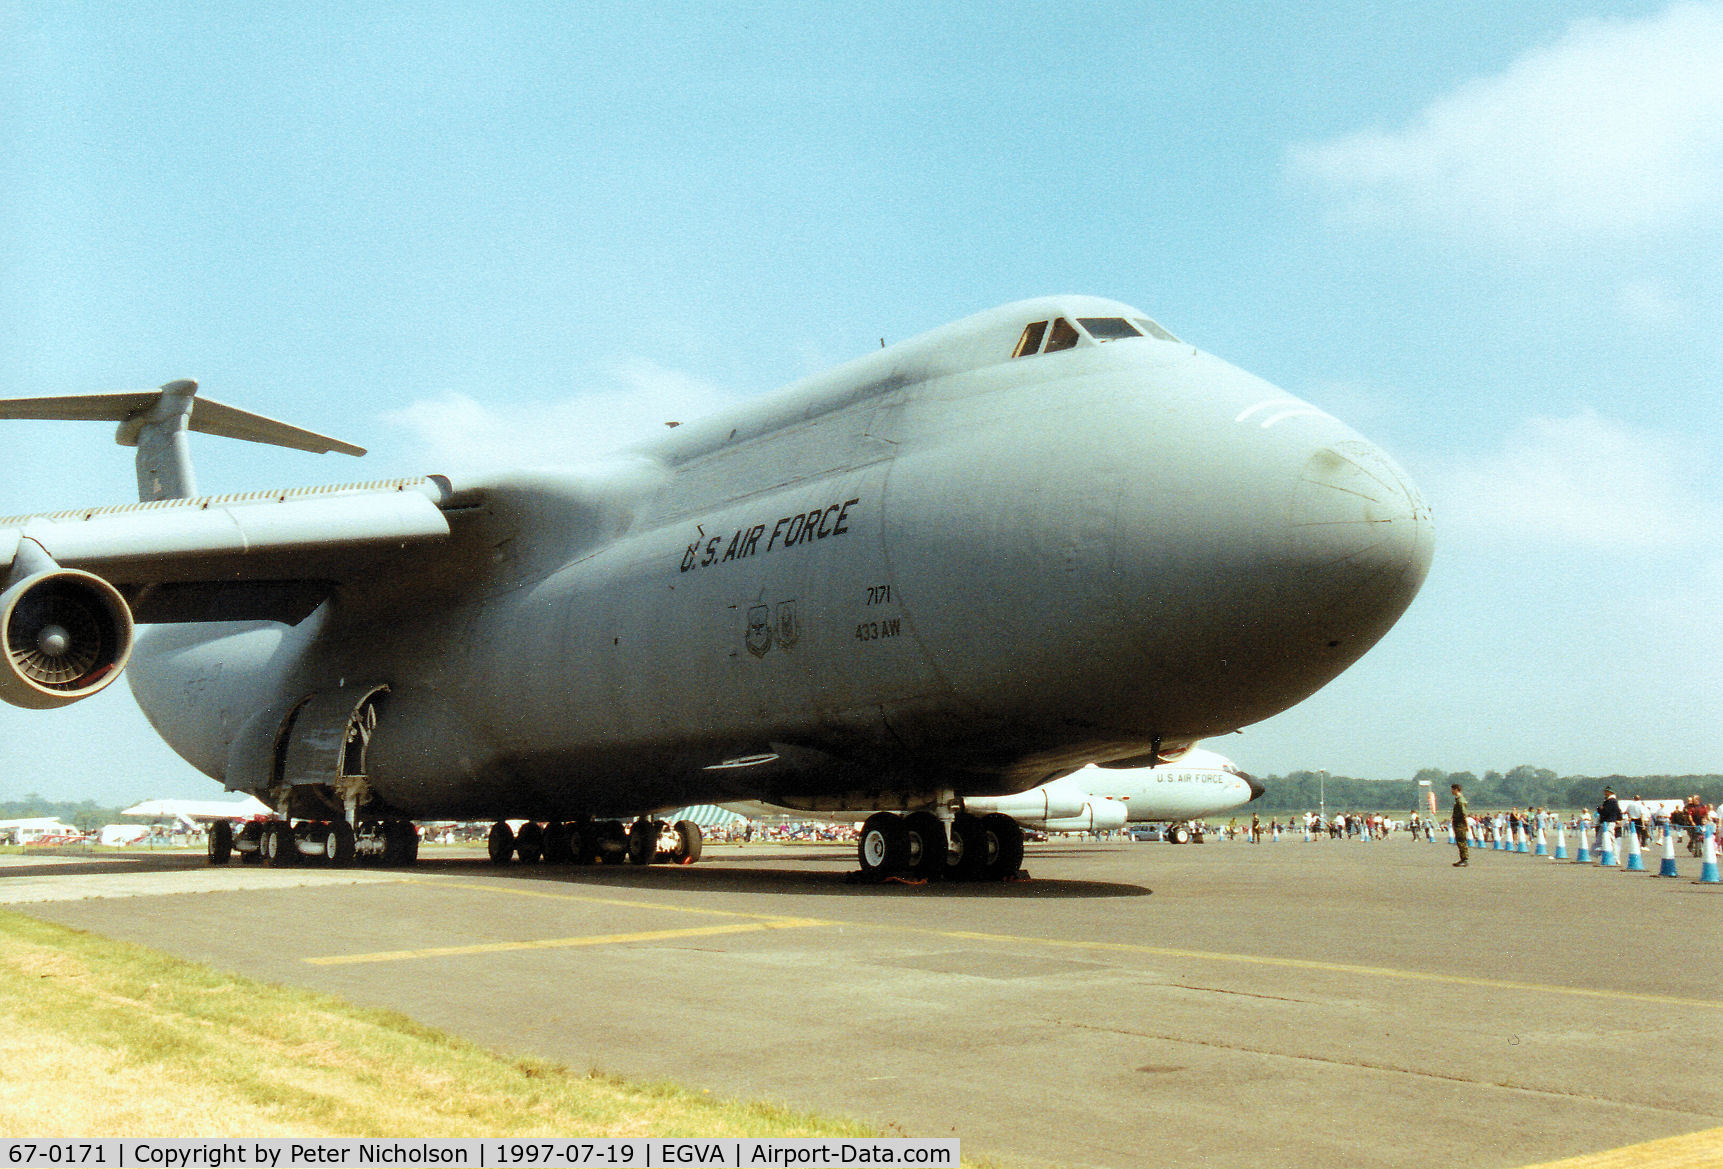 67-0171, 1967 Lockheed C-5A Galaxy C/N 500-0010, C-5A Galaxy, callsign Reach 7171, of 68th Airlift Squadron/433rd Airlift Wing on display at the 1997 Intnl Air Tattoo at RAF Fairford.